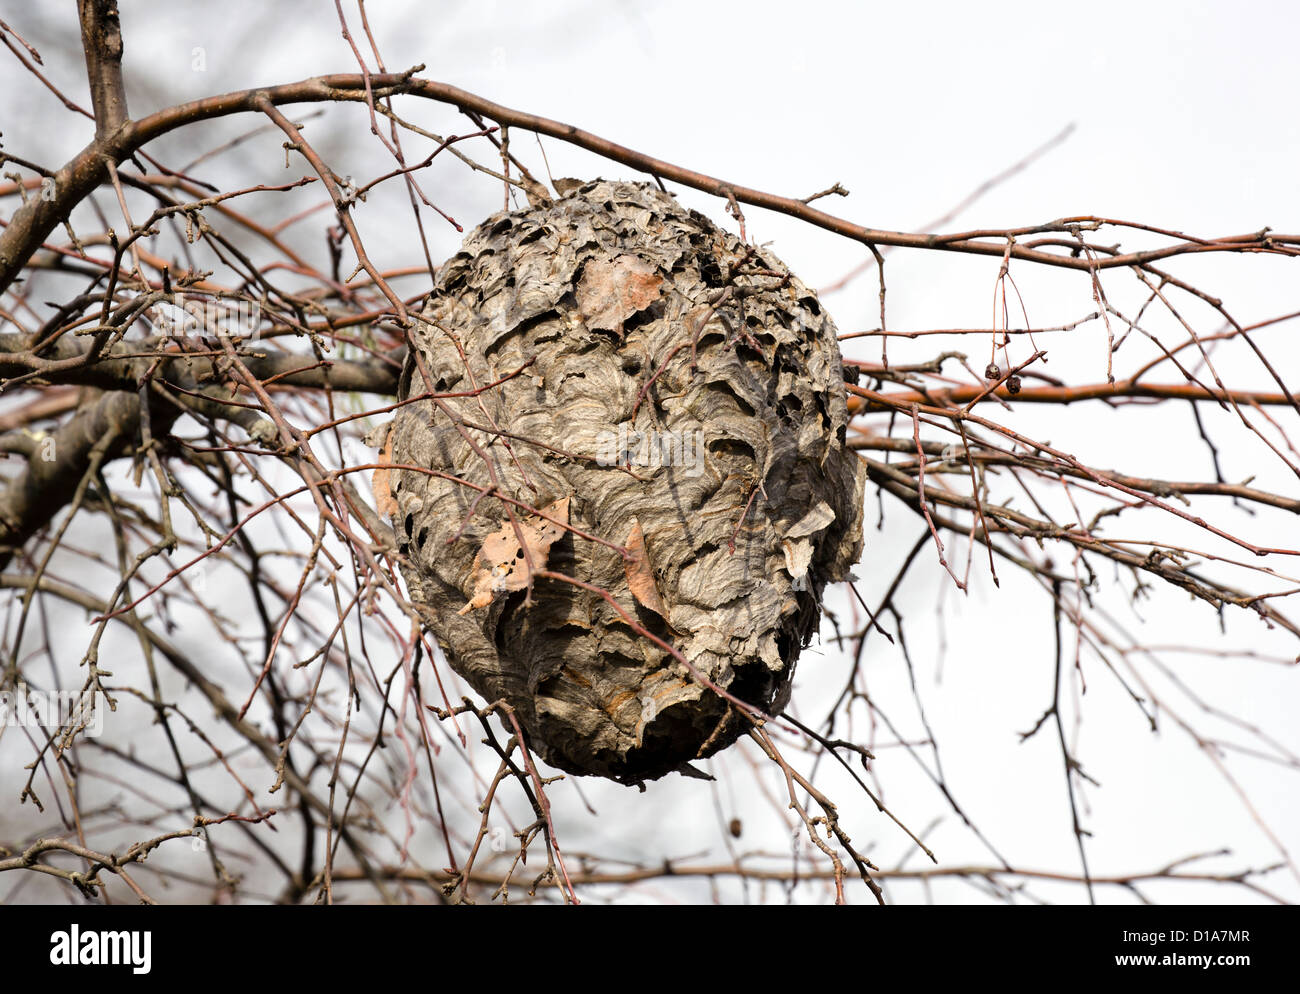 A hornets nest in a tree. Stock Photo